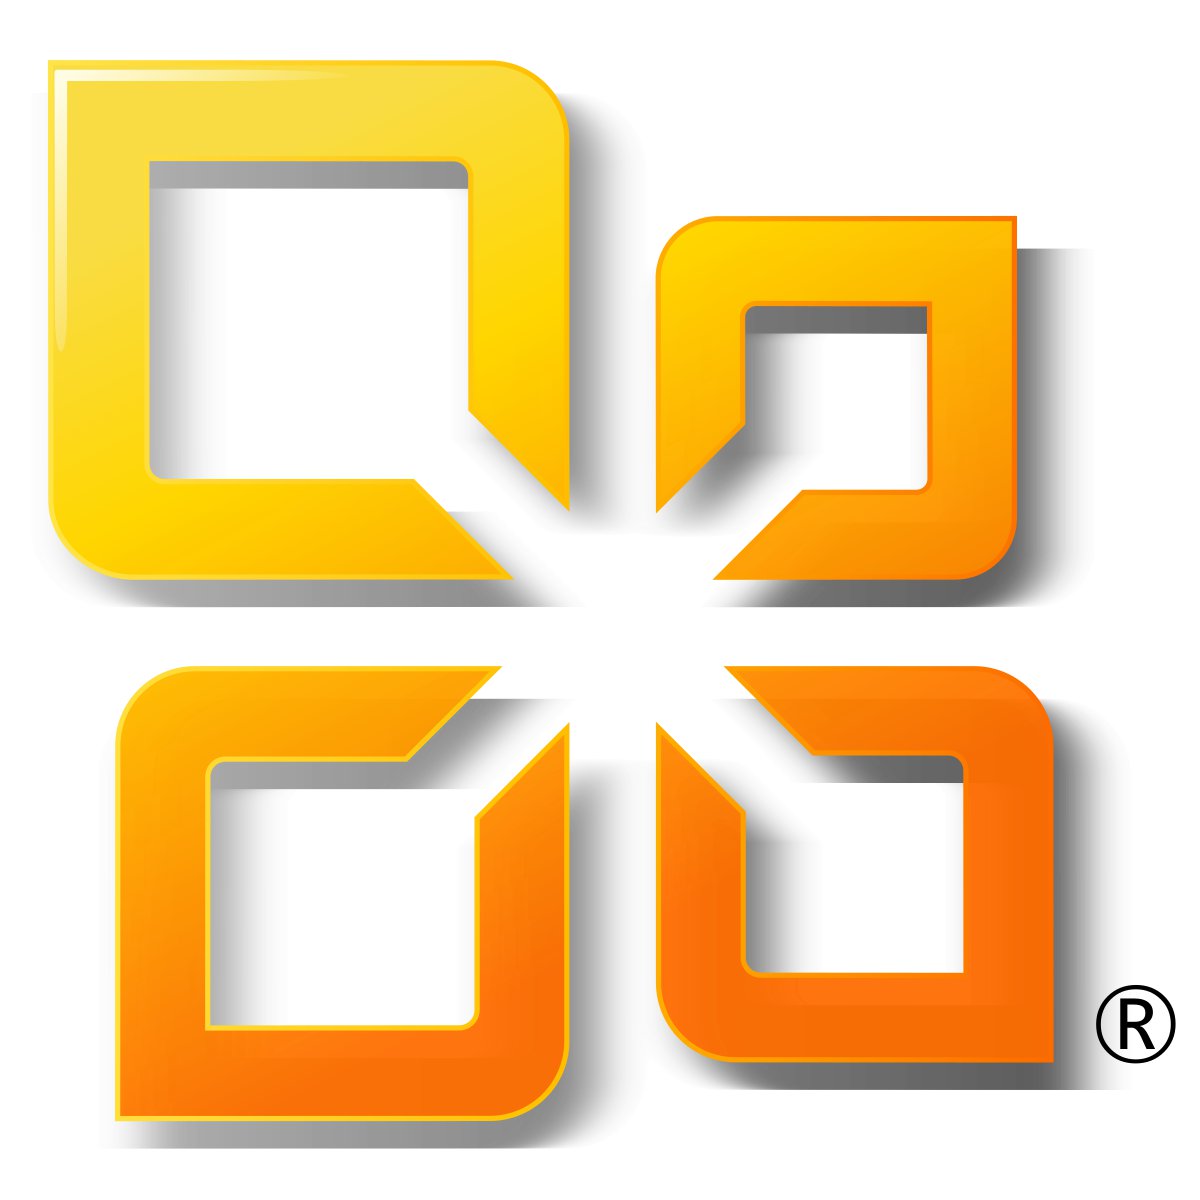 microsoft office professional plus 2010 free download for windows 7